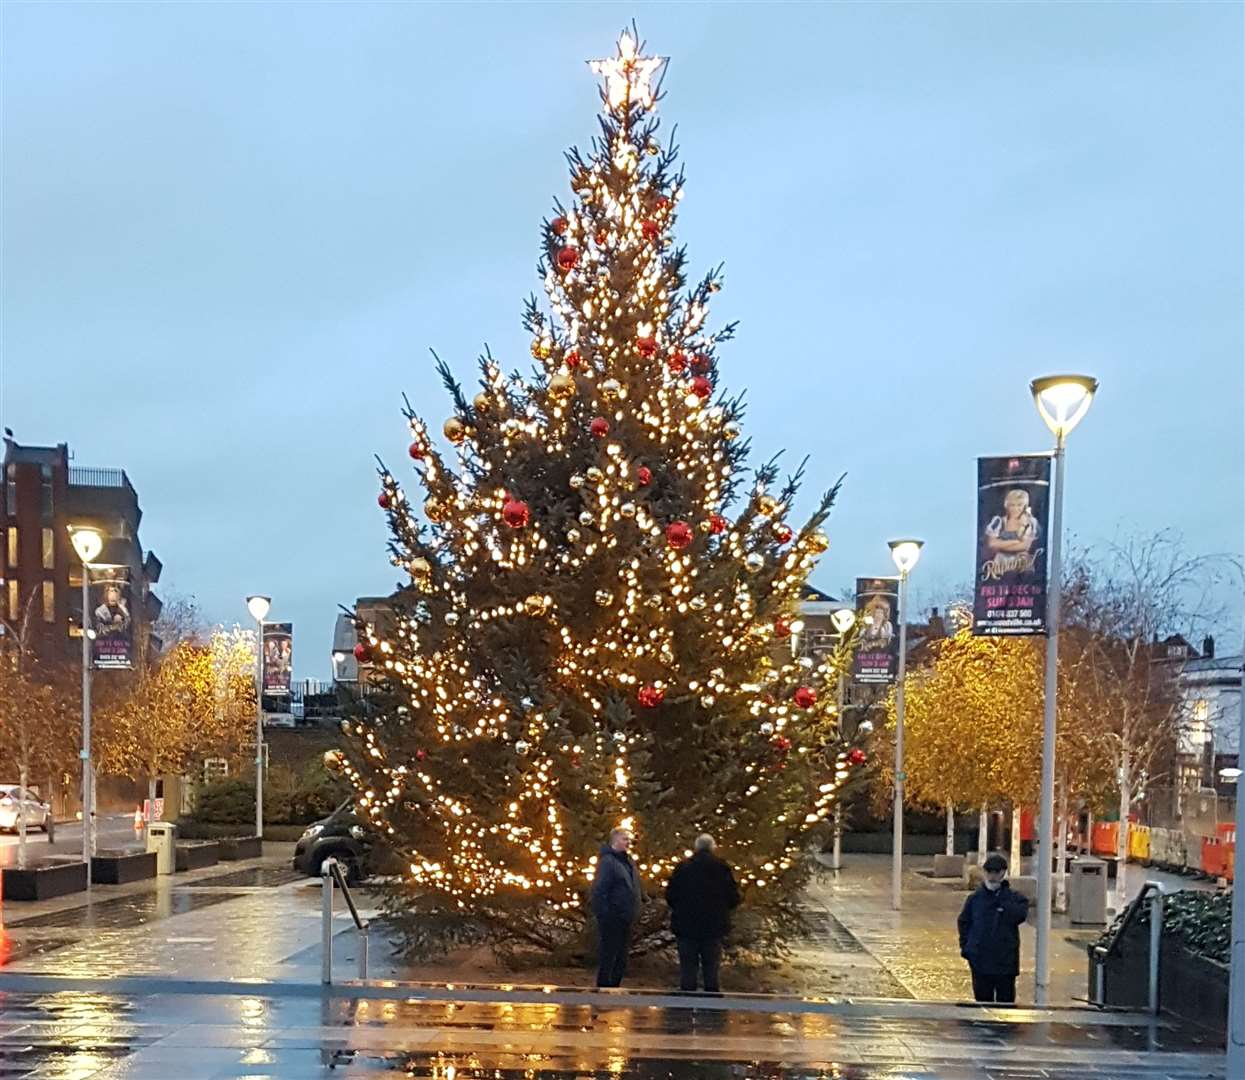 At least you can still go and see the Christmas tree in Community Square. Picture: Jason Arthur